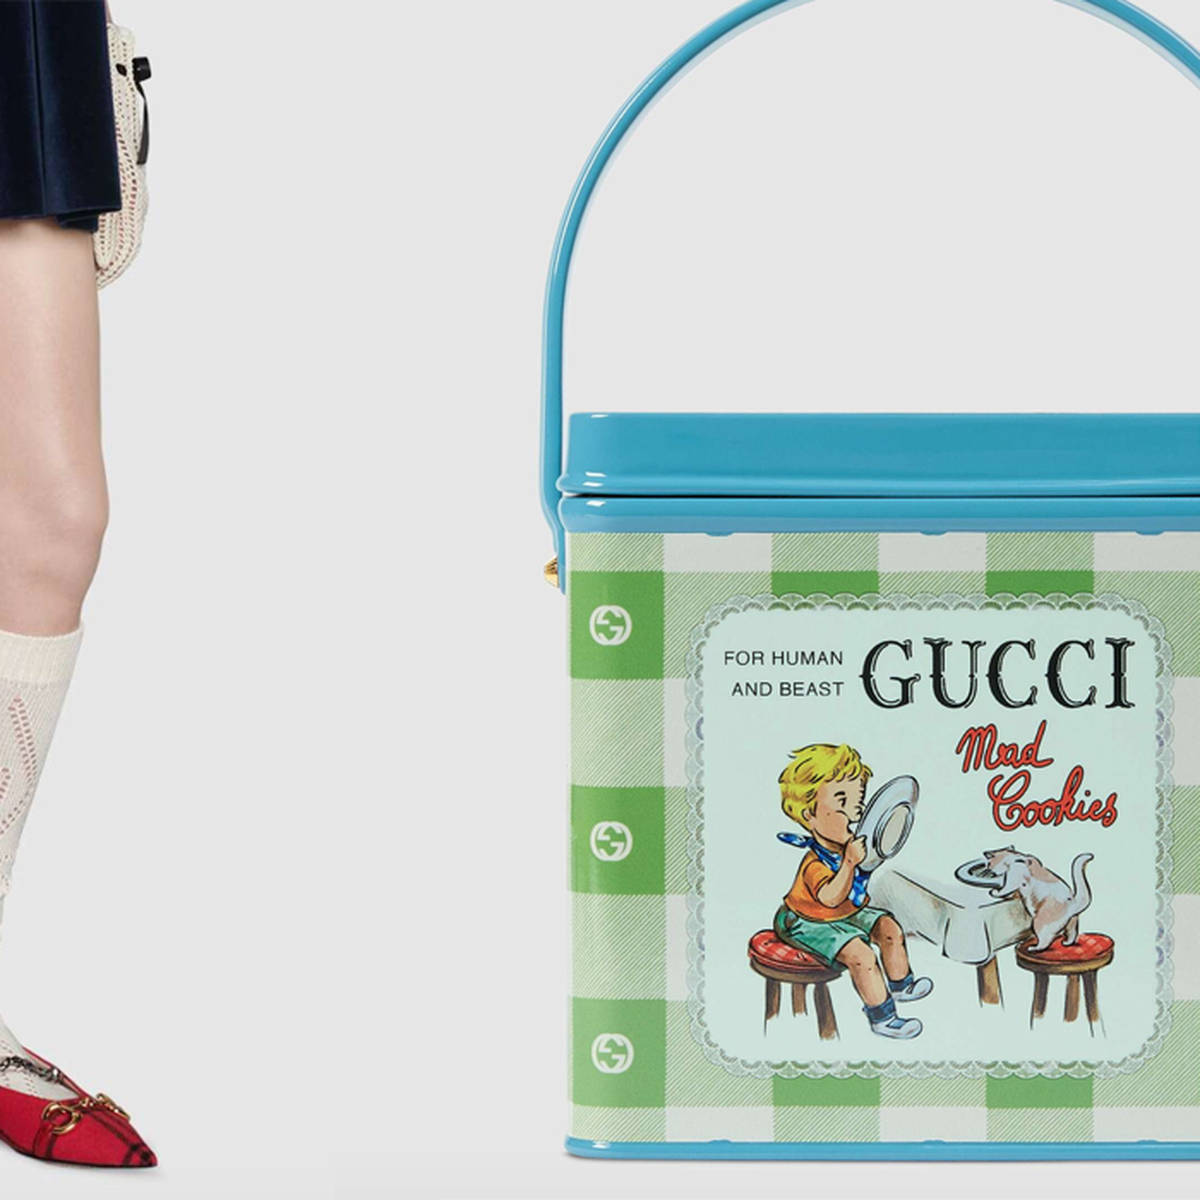 Gucci is selling a green plastic lunchbox for a whopping £2,210